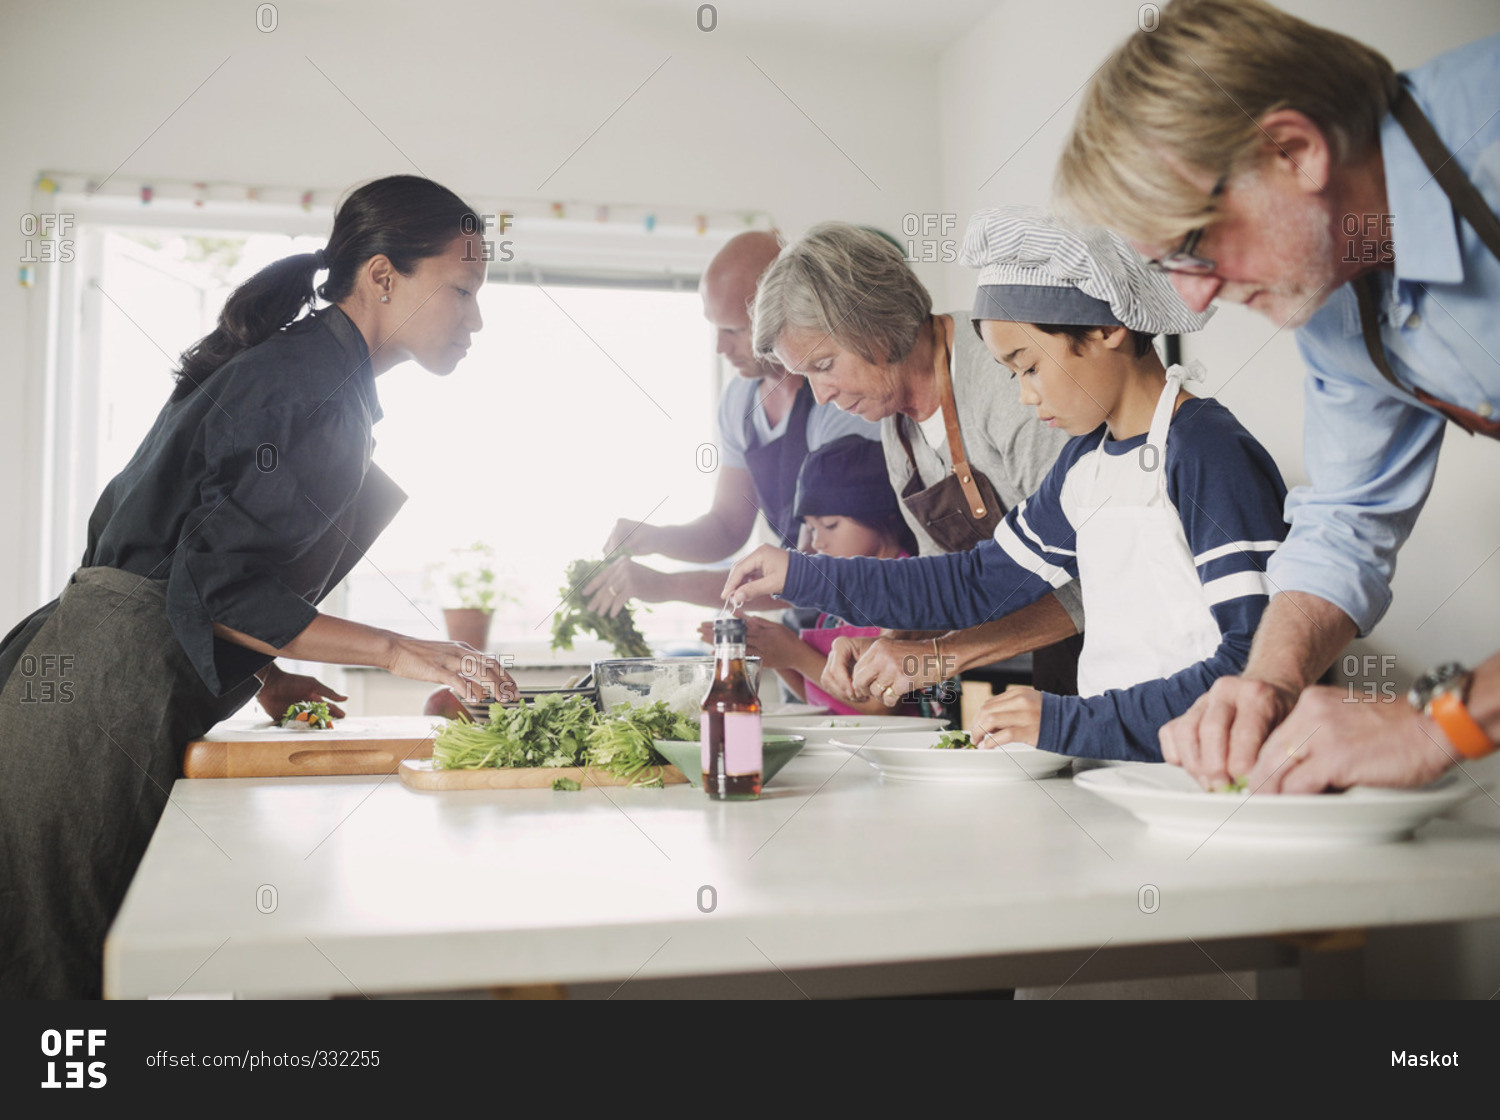 Woman guiding family in preparing Asian food at kitchen